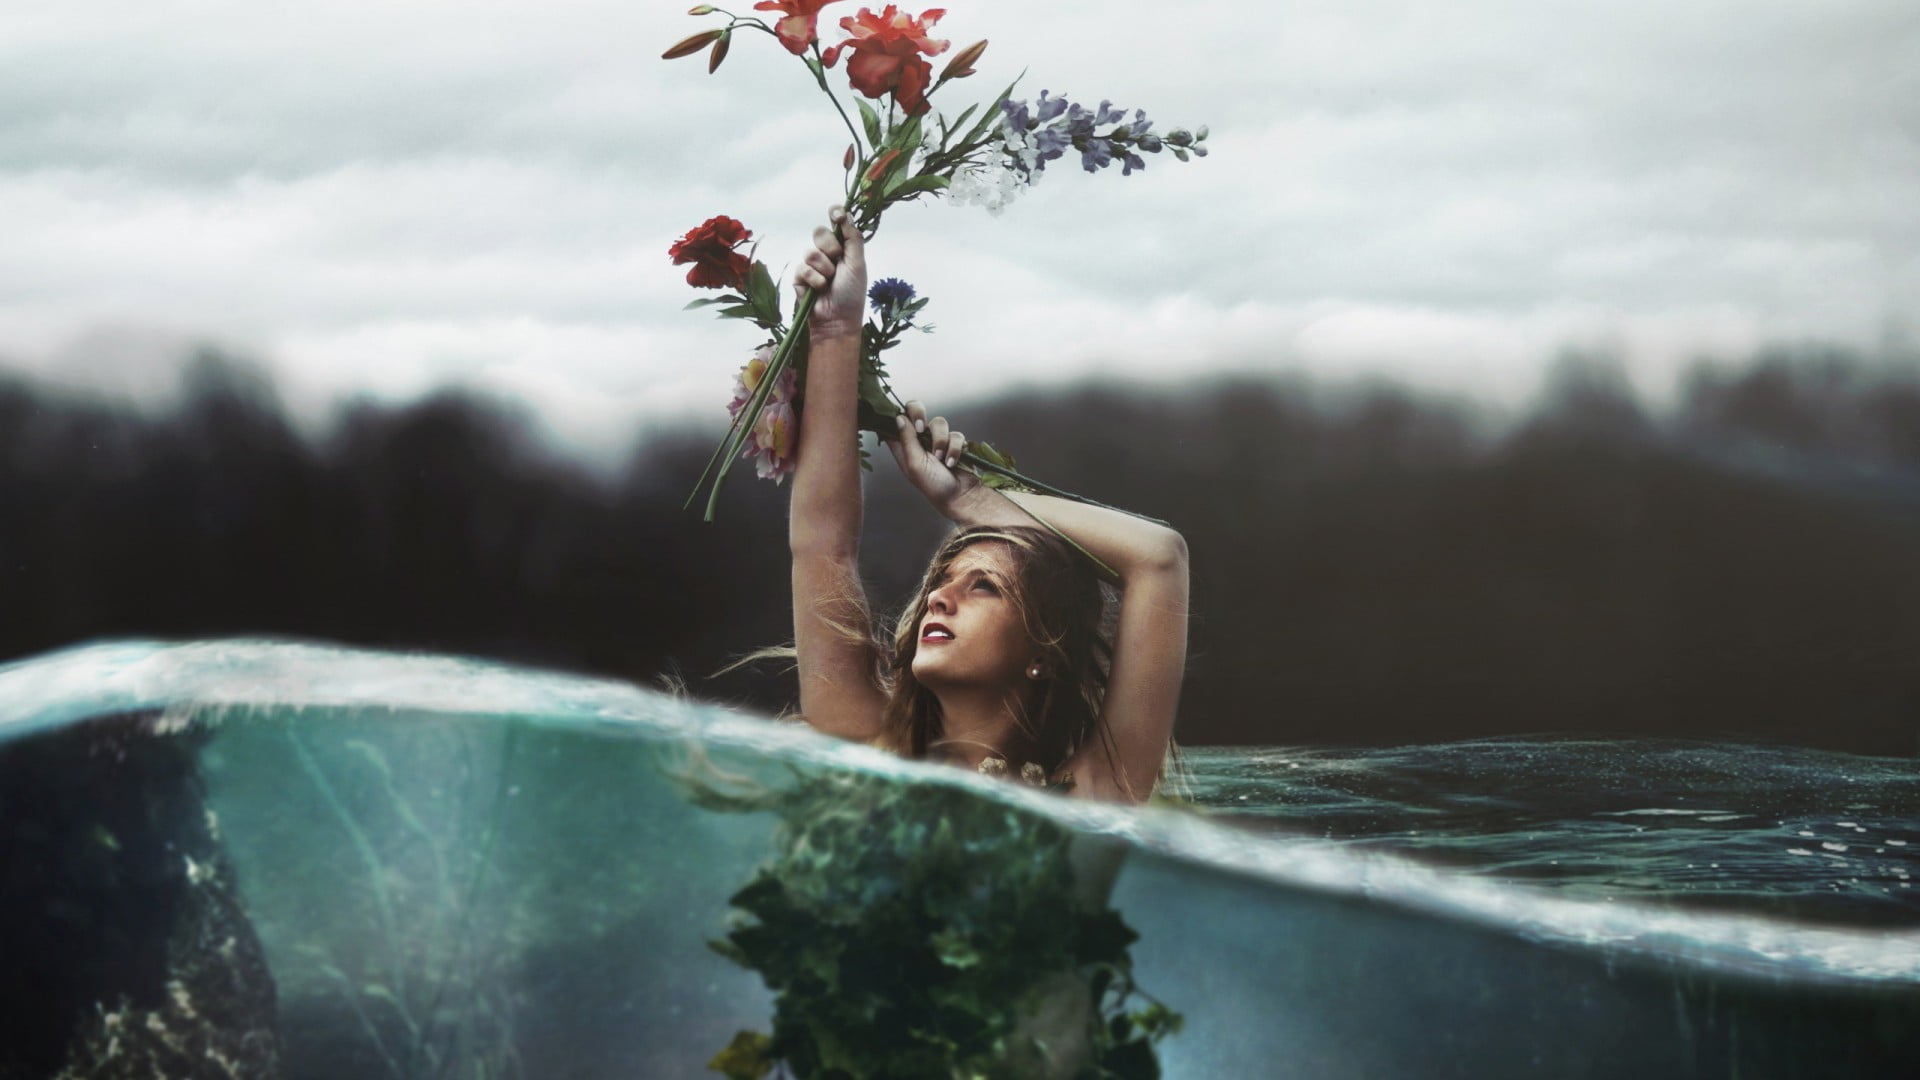 women, flowers, sea, split view, bouquets, water, nature, one person